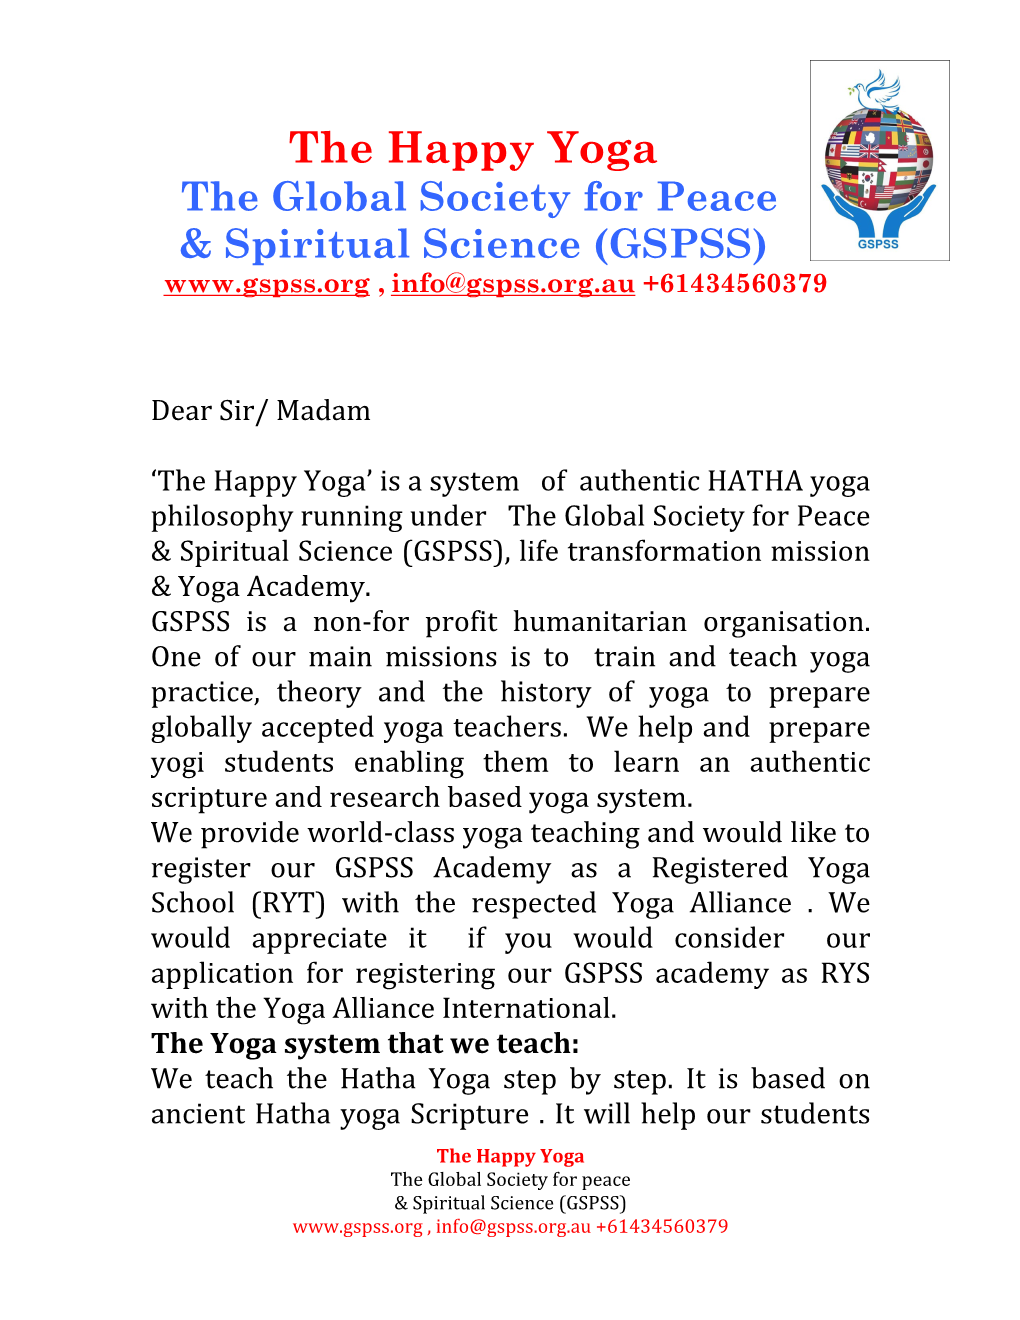 The Happy Yoga the Global Society for Peace & Spiritual Science (GSPSS) , Info@Gspss.Org.Au +61434560379